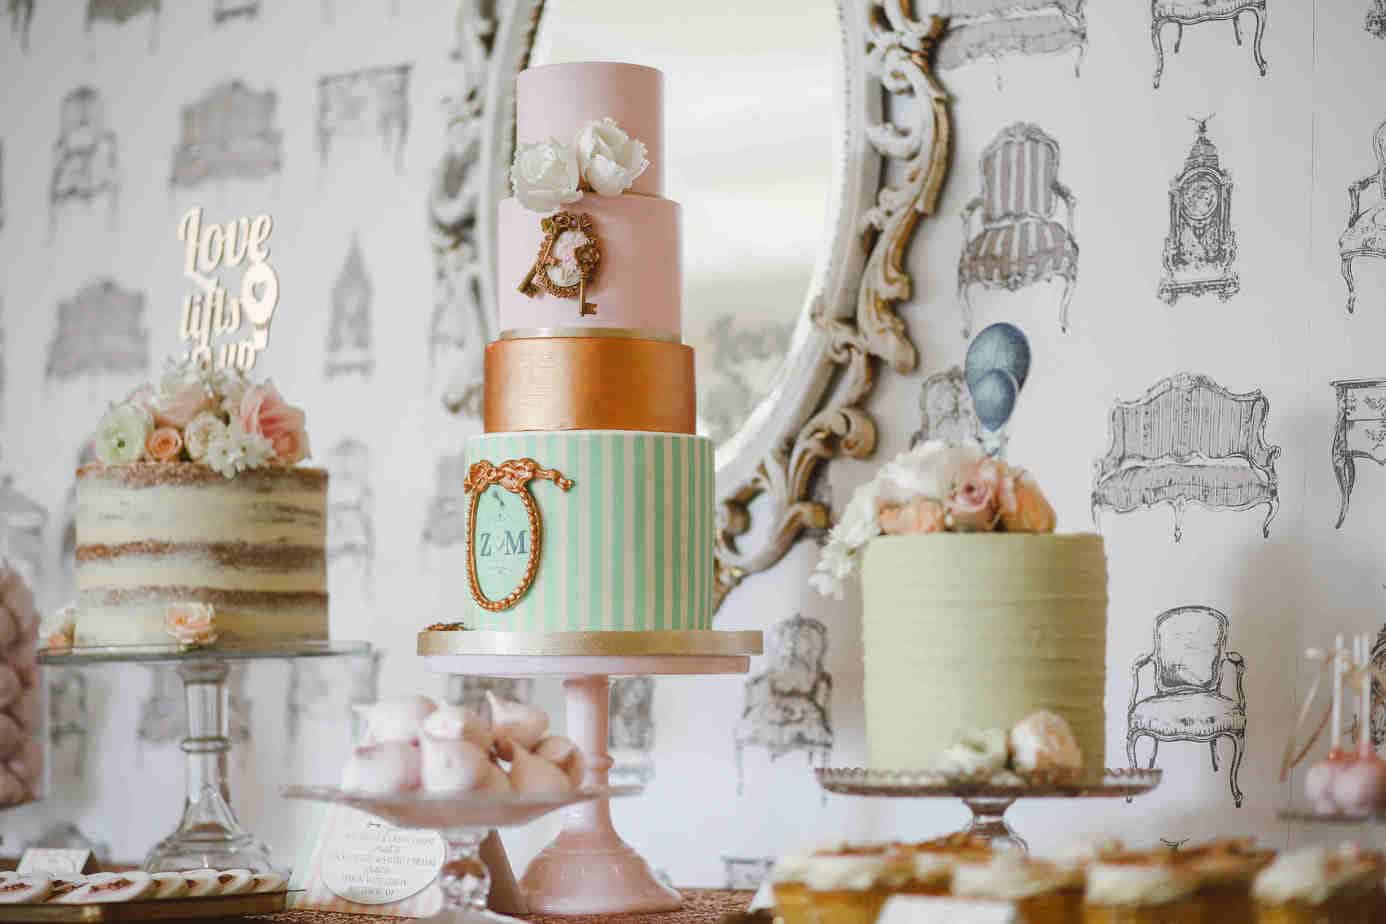 The top 3 problems with wedding cake